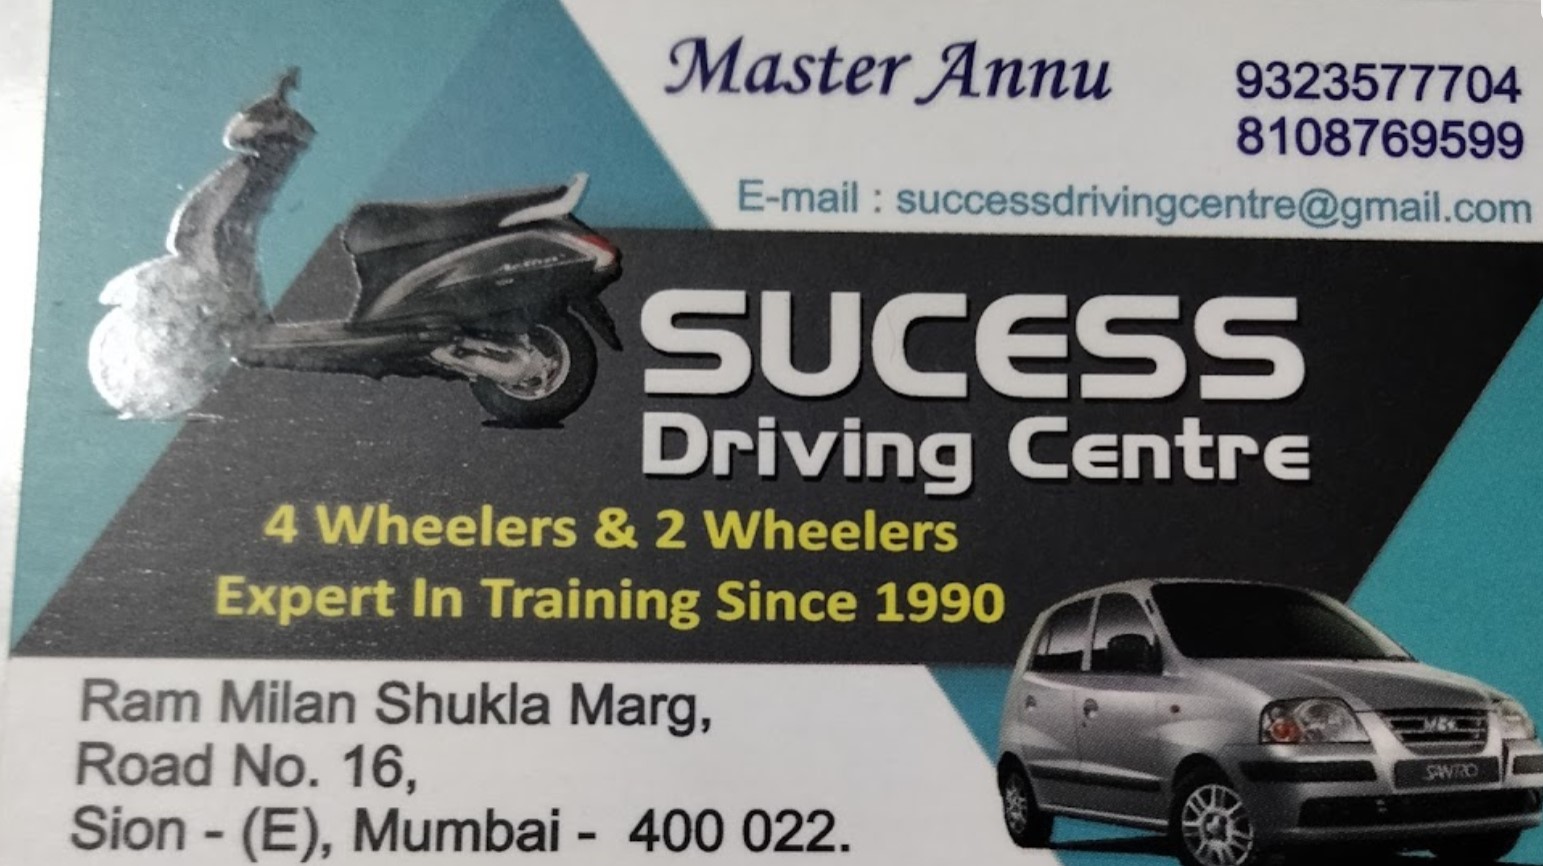 Sucess Driving Centre in Sion